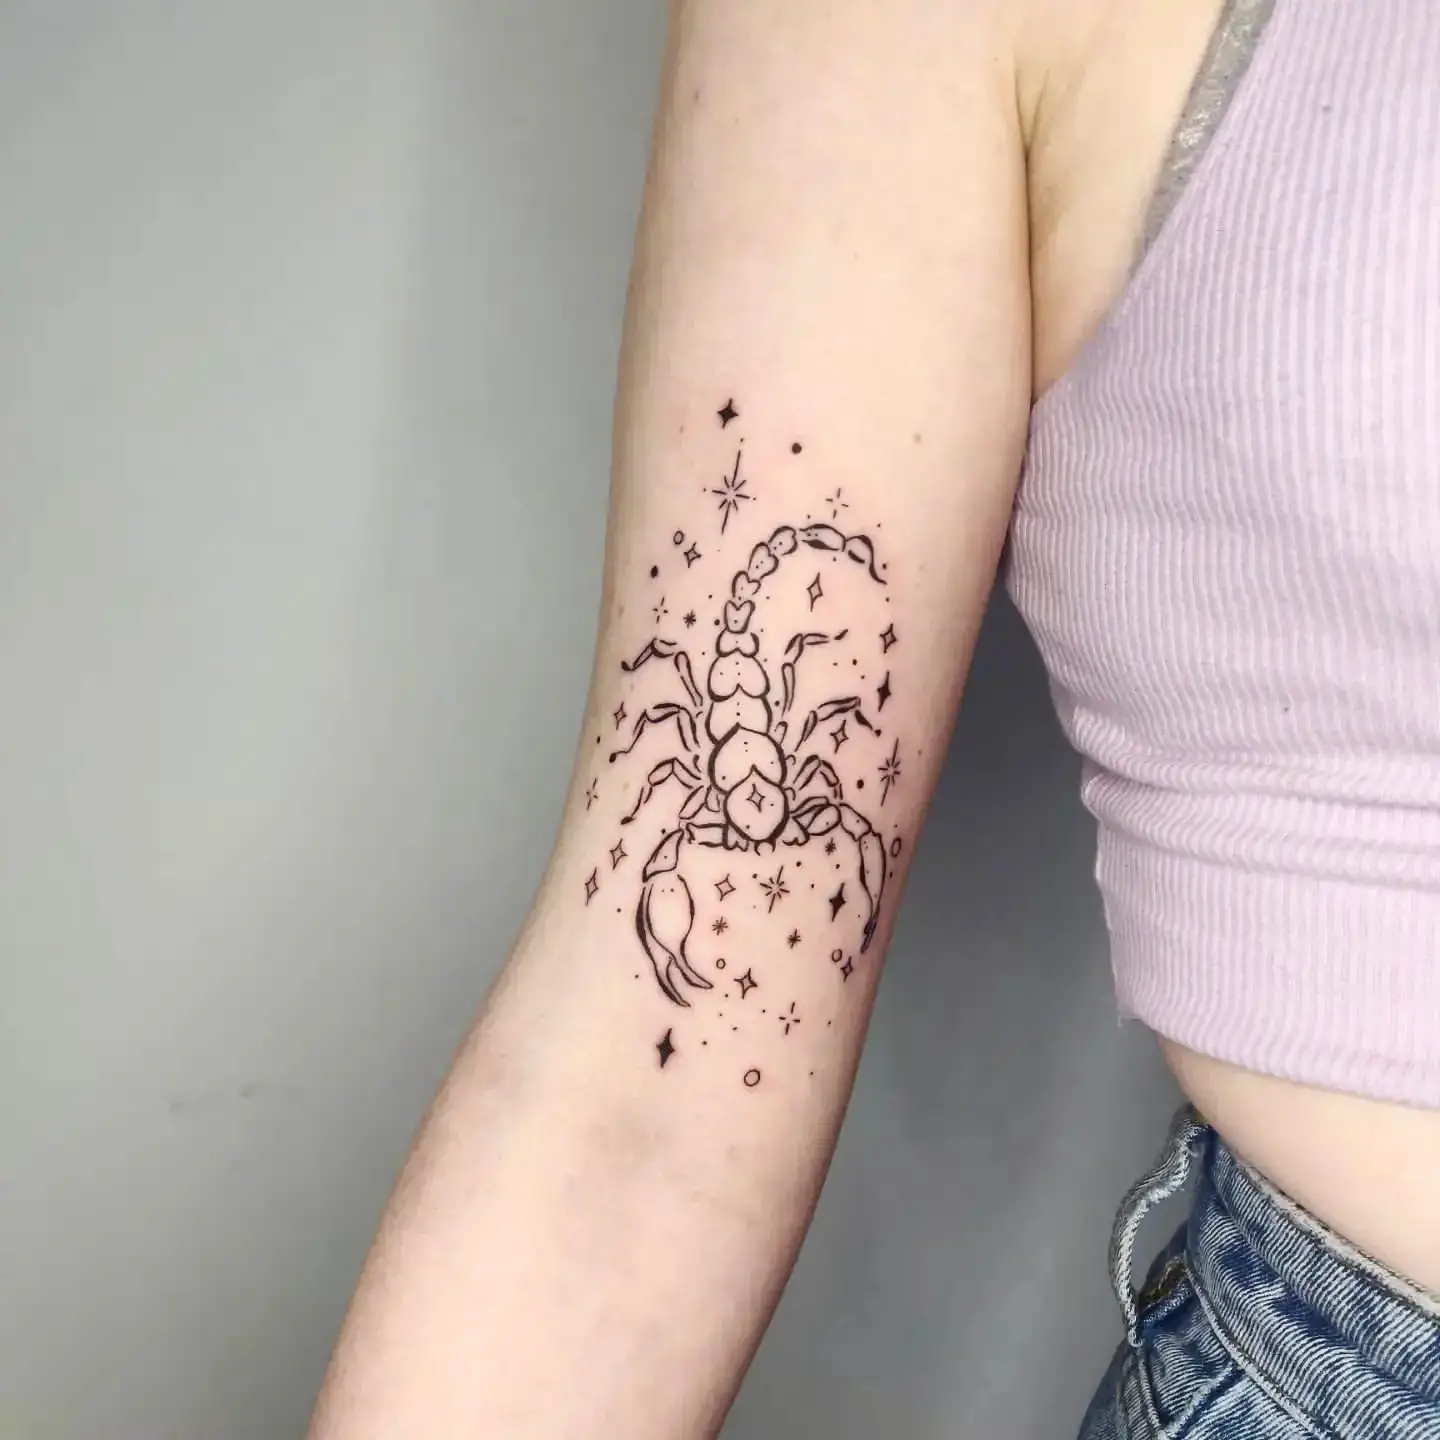 Female Unique Tattoos Meaning: Meaningful and creative tattoo ideas specifically designed.